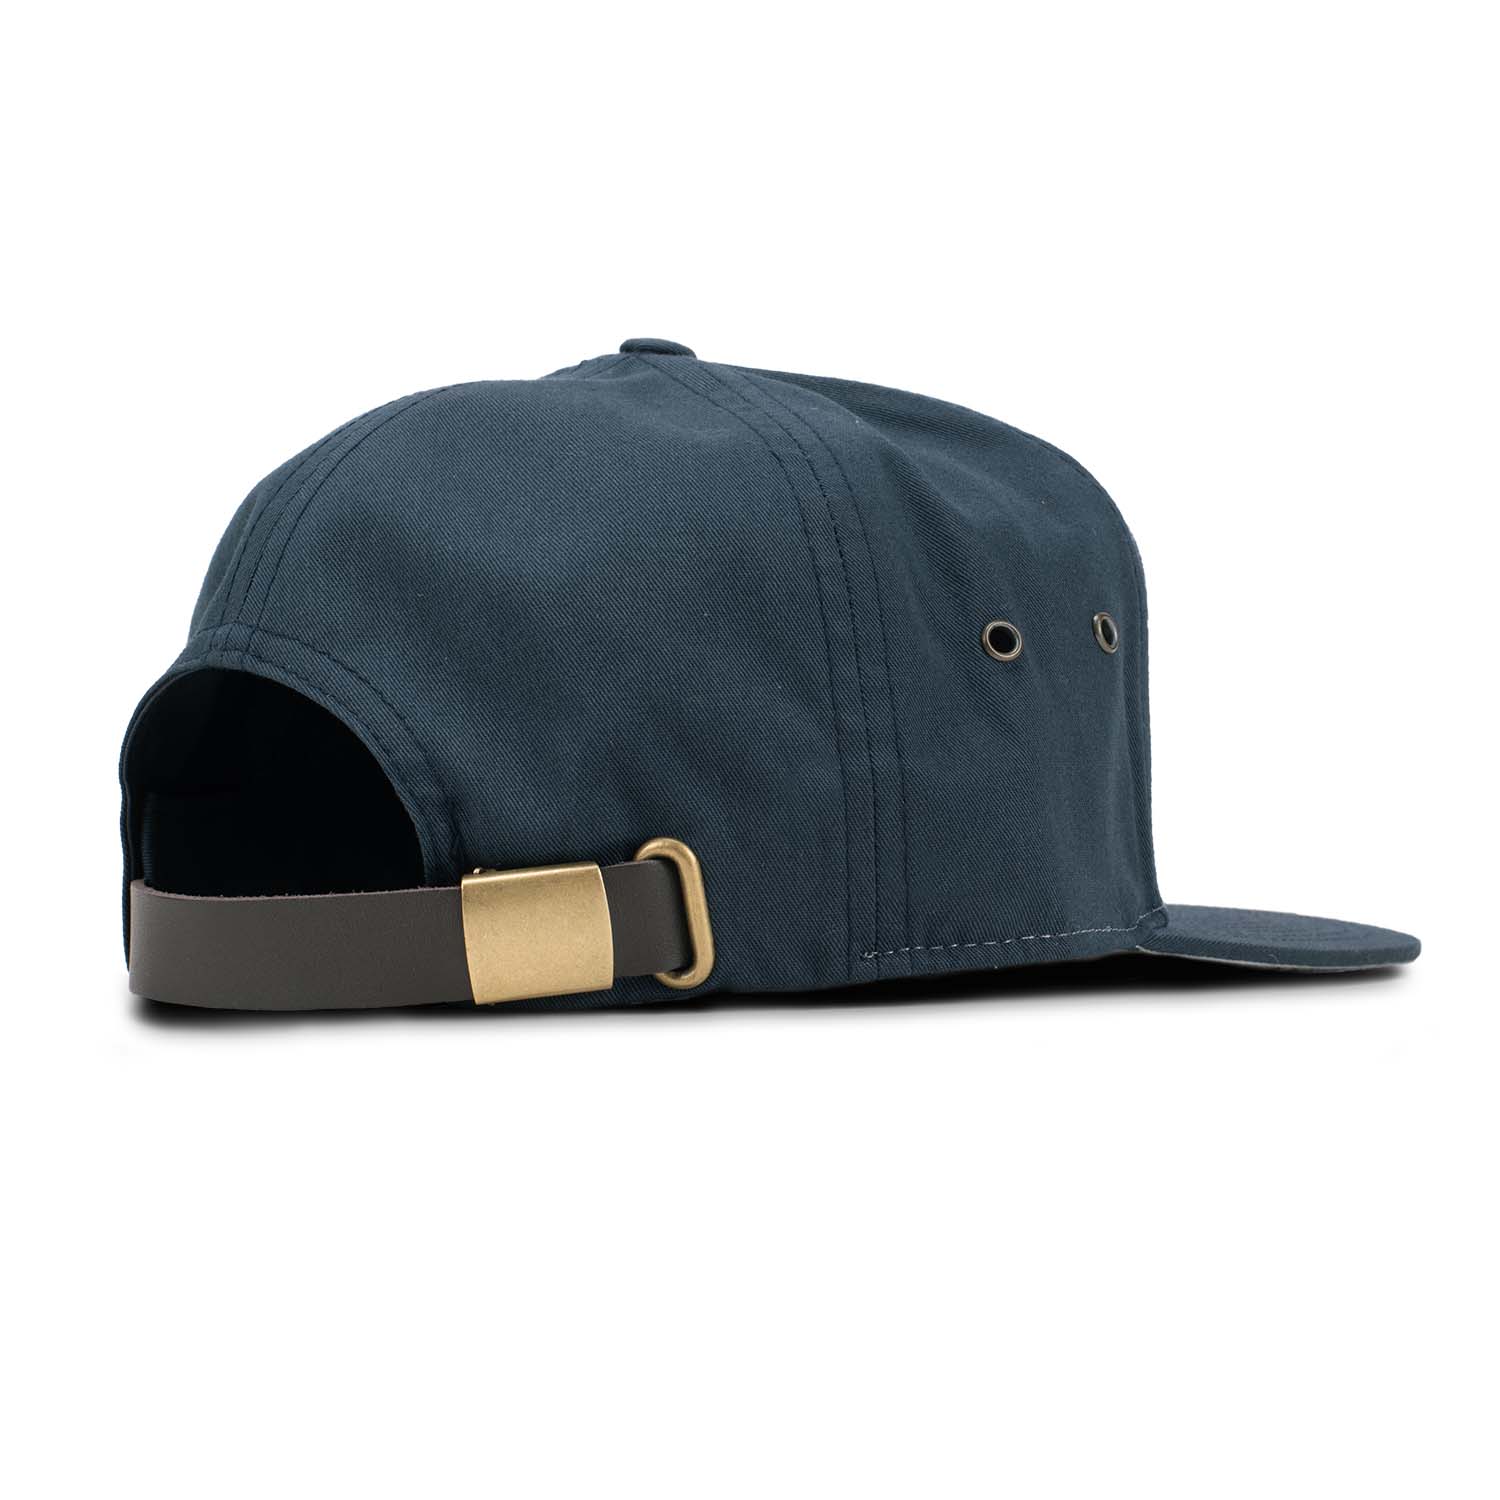 Back view of the pigeon gray and navy 7 panel style hat showing the adjustable leather strapback with brass clasp closure and brass eyelets